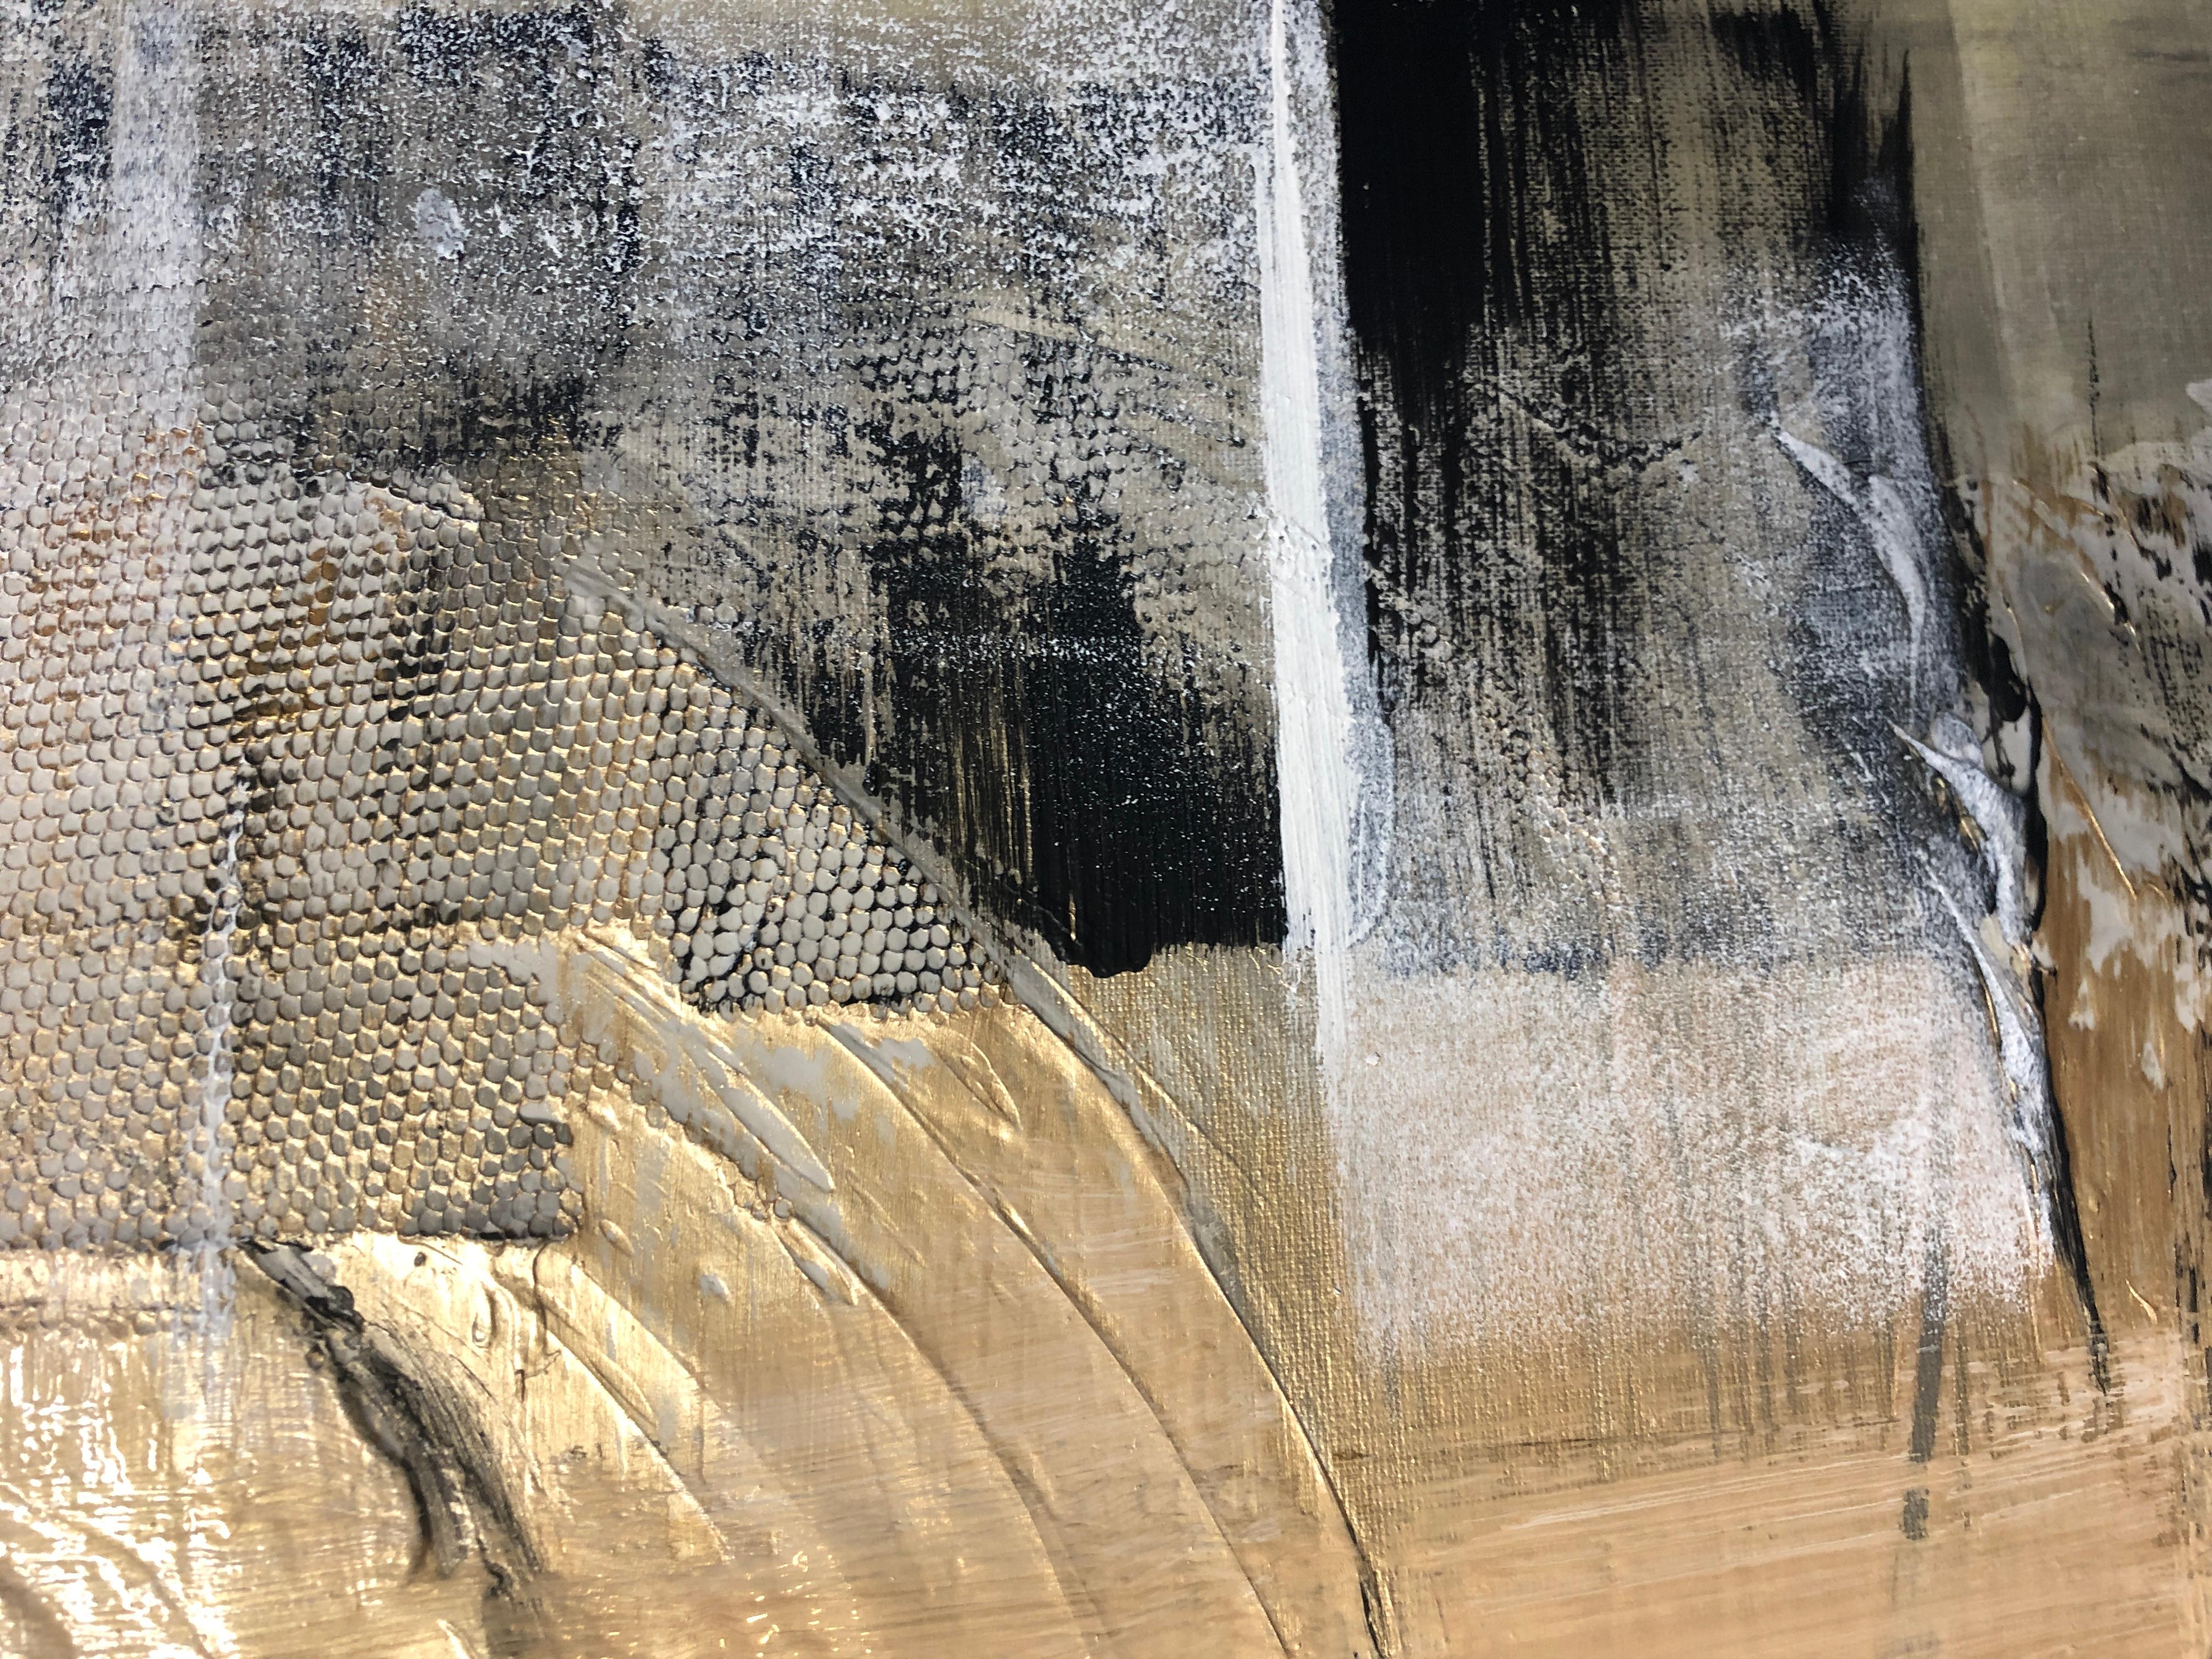 Gold Black Mixed Media on Canvas: Acrylic Stucco, Modeling Paste Heavy Texture  - Beige Abstract Painting by Irena Orlov